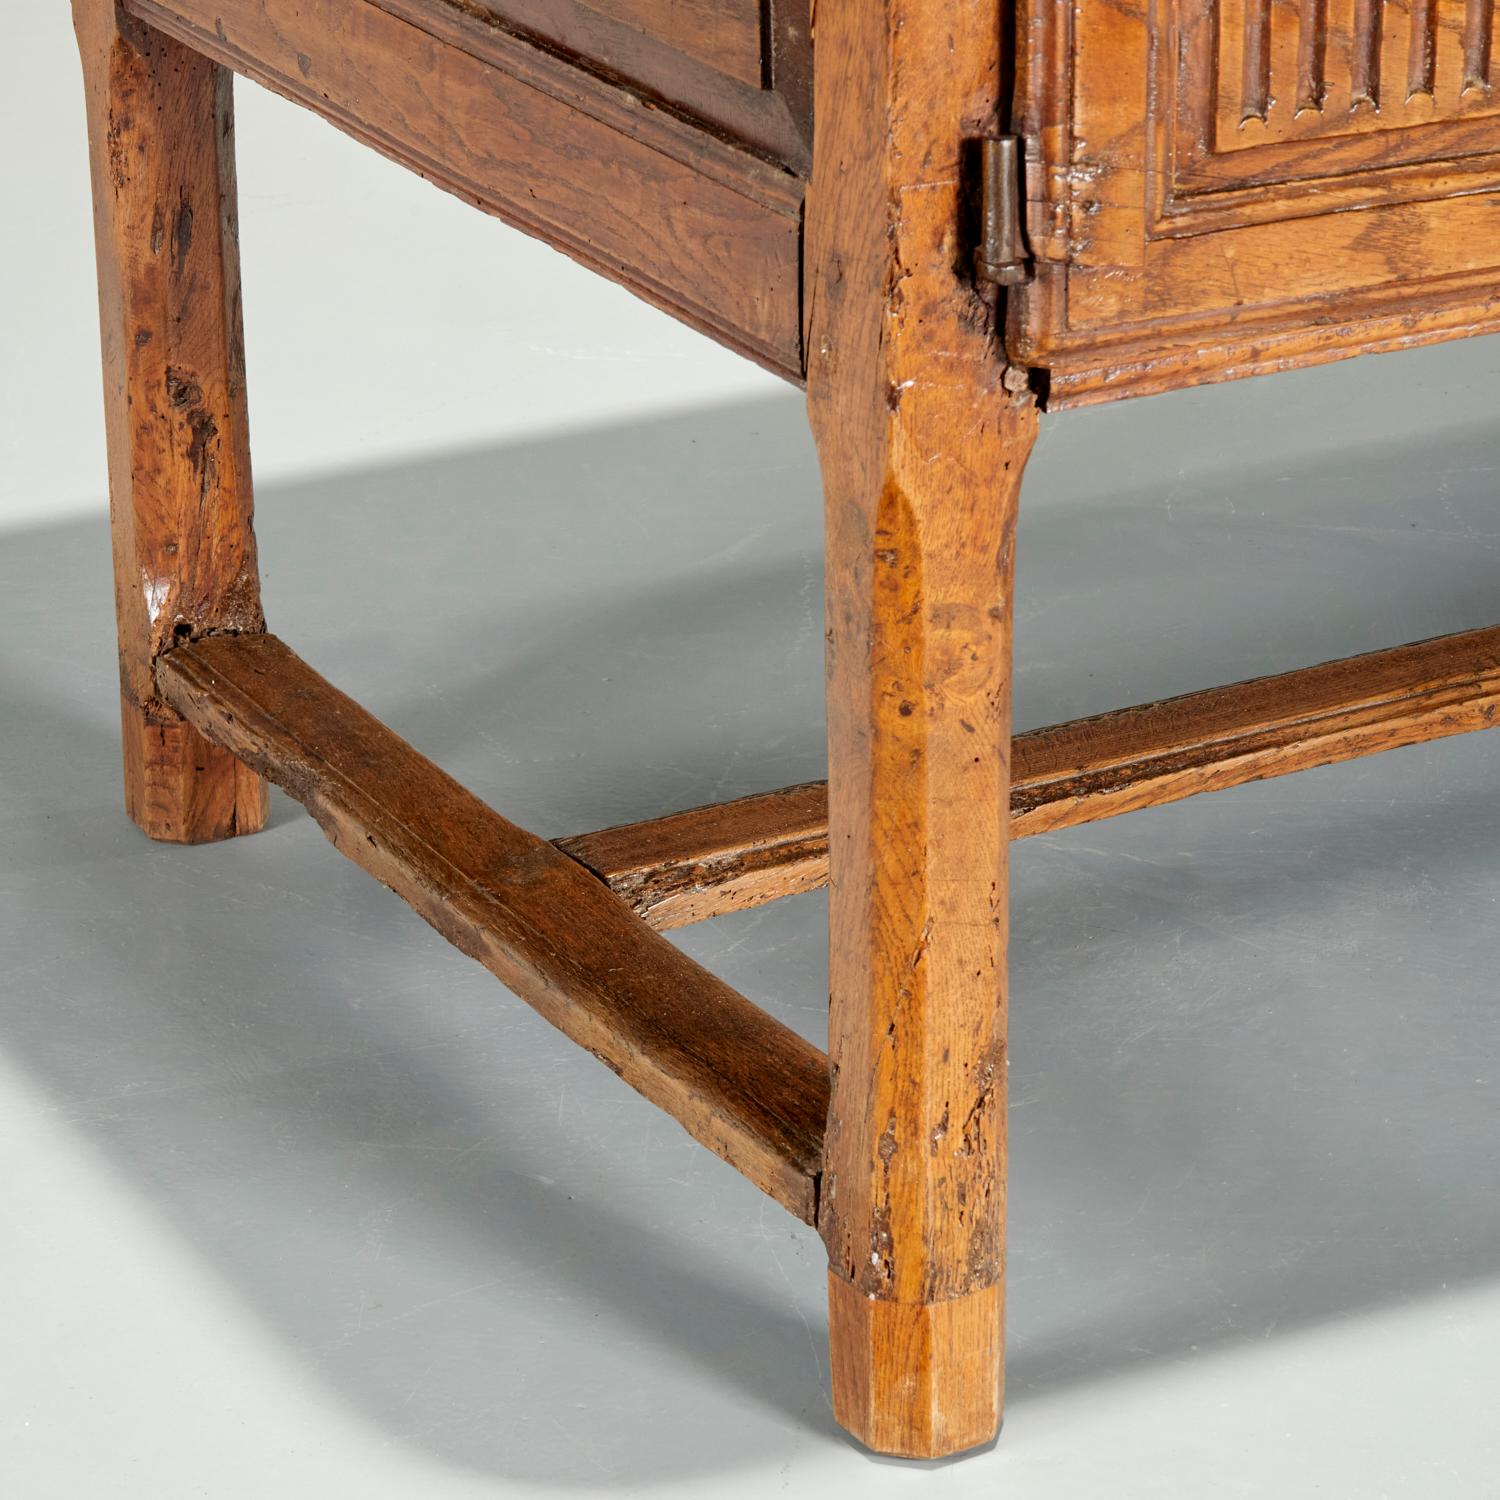 18th c., possibly Spanish, solid oak table, wrought iron hardware, the rectangular three board plank top over two hinged panel doors opening to storage, raised on octagonal legs joined by h-stretcher. With a beautiful buttery patina and sturdy